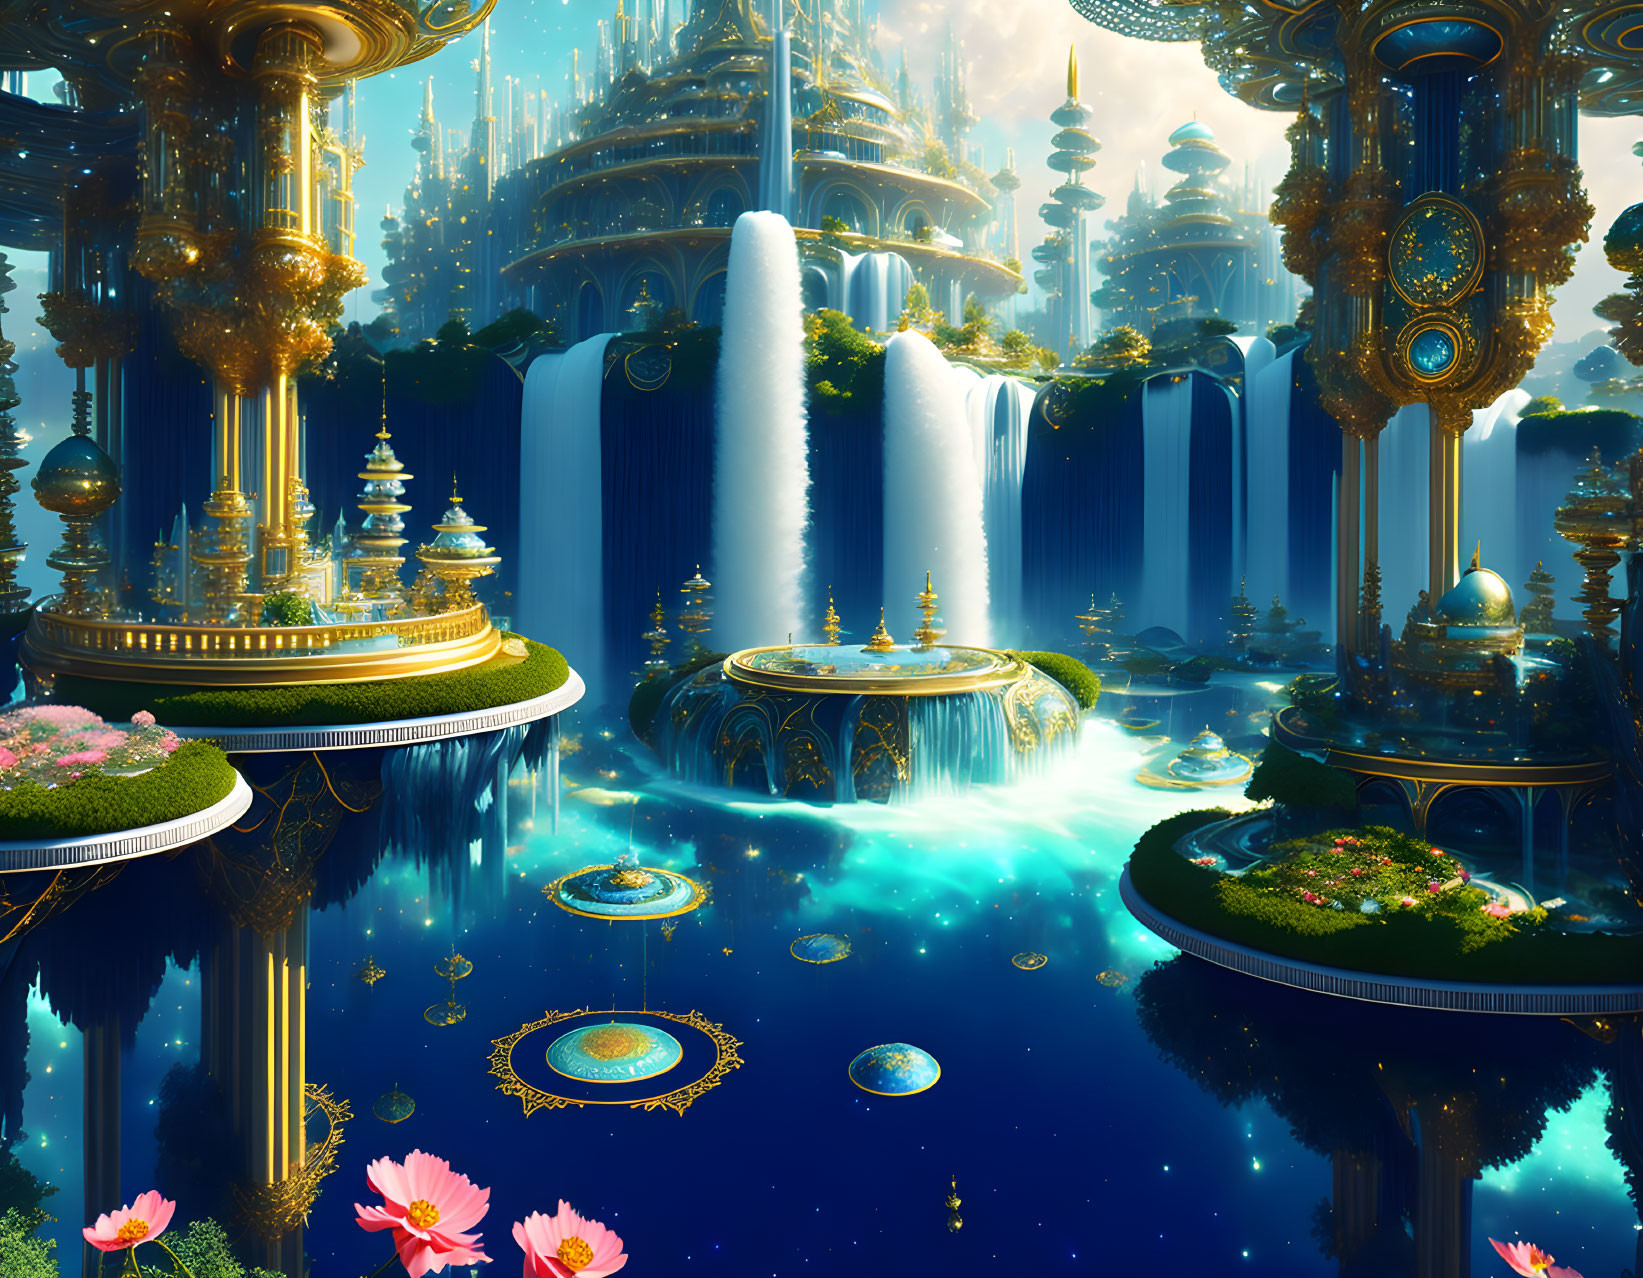 Fantastical city with golden towers, floating gardens, and vibrant flora by turquoise water